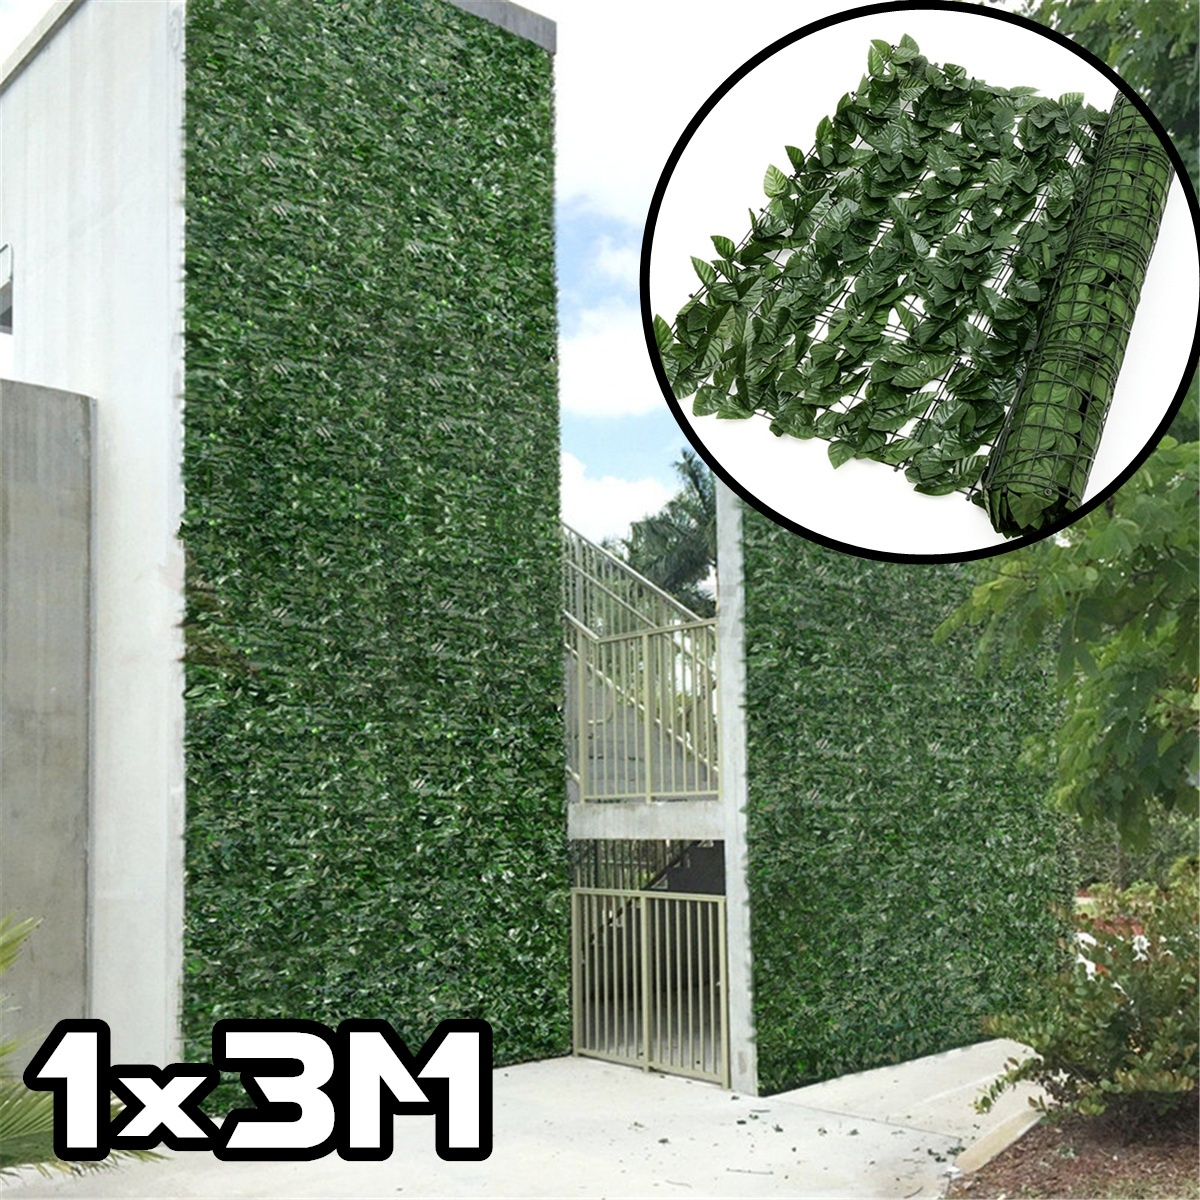 Expanding-13M-Artificial-Lvy-Leaf-Wall-Fence-Green-Garden-Screen-Hedge-Decorations-1474970-3